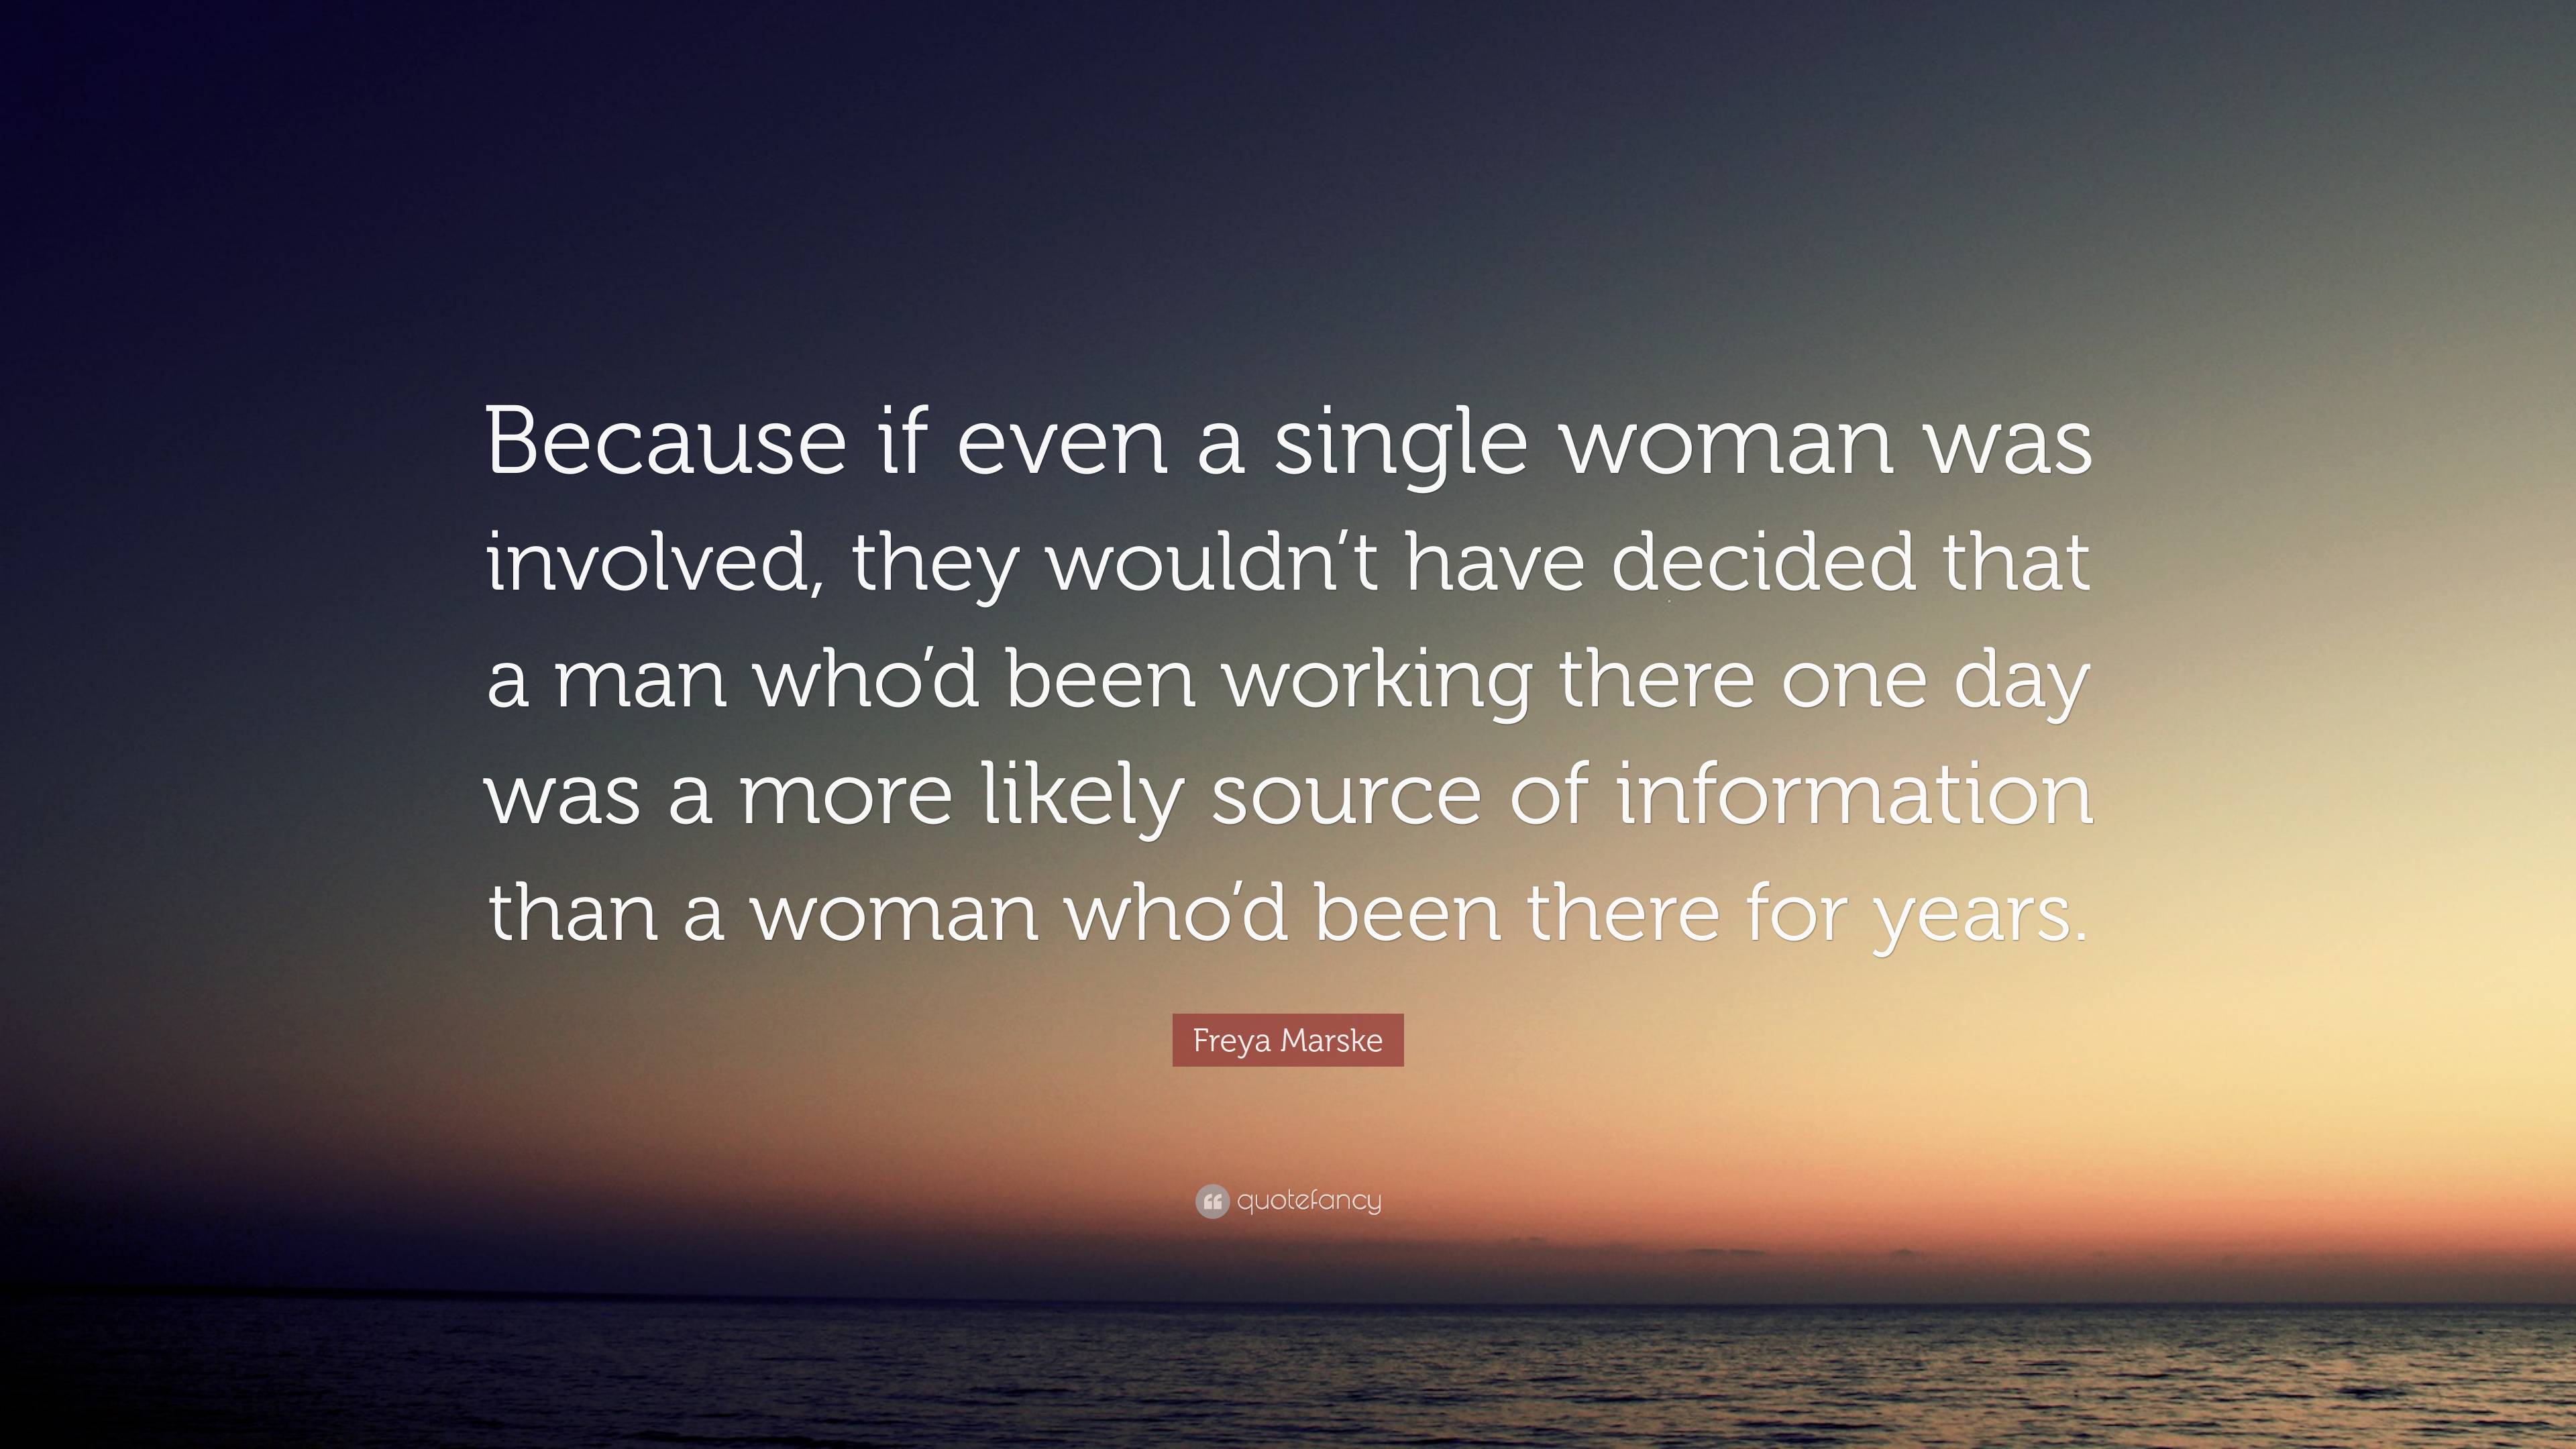 Freya Marske Quote: “Because if even a single woman was involved, they ...